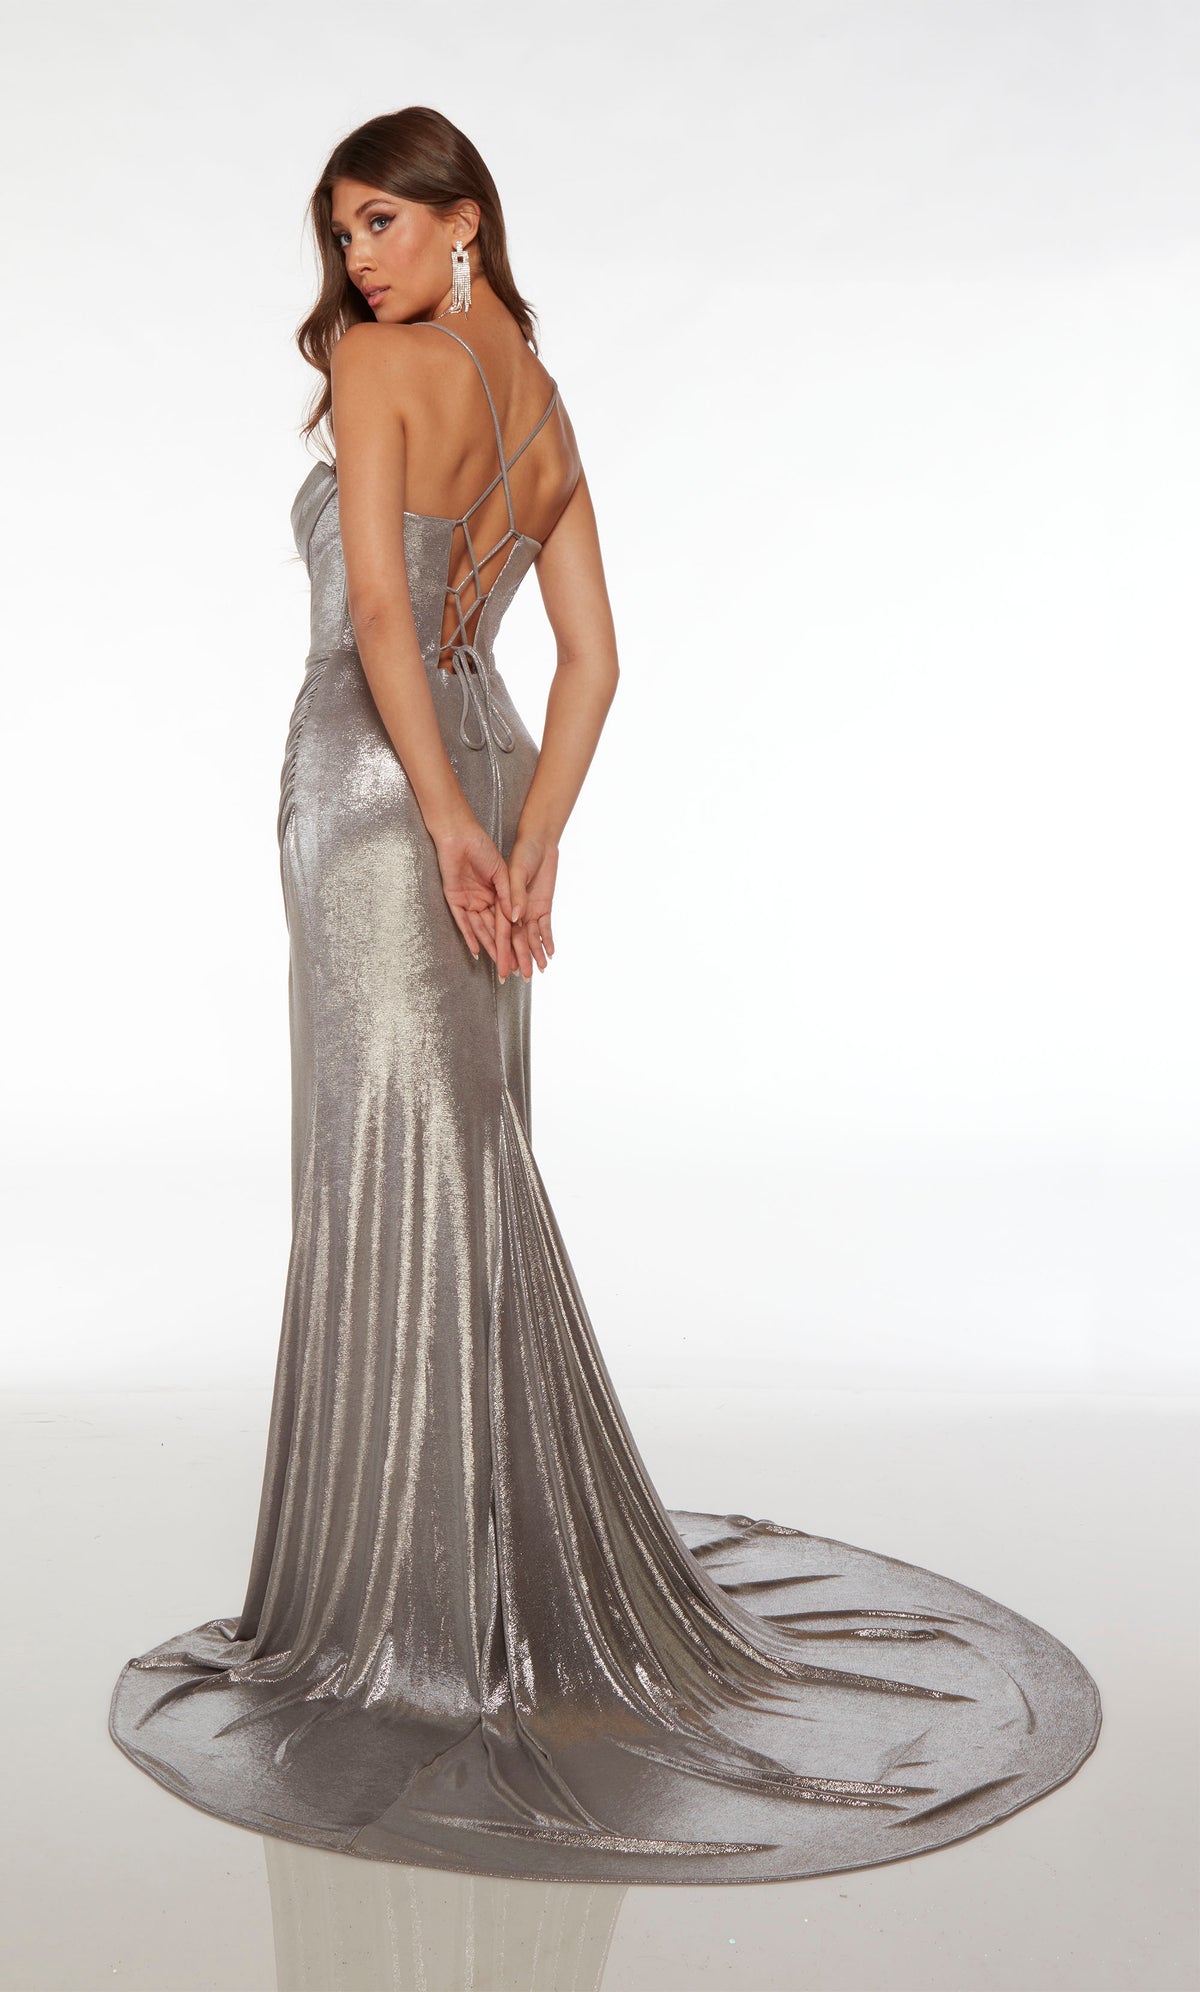 Silver unique prom dress featuring an sweetheart-cowl neckline, corset top, high slit, lace-up back, and train, crafted in an metallic stretch fabric.